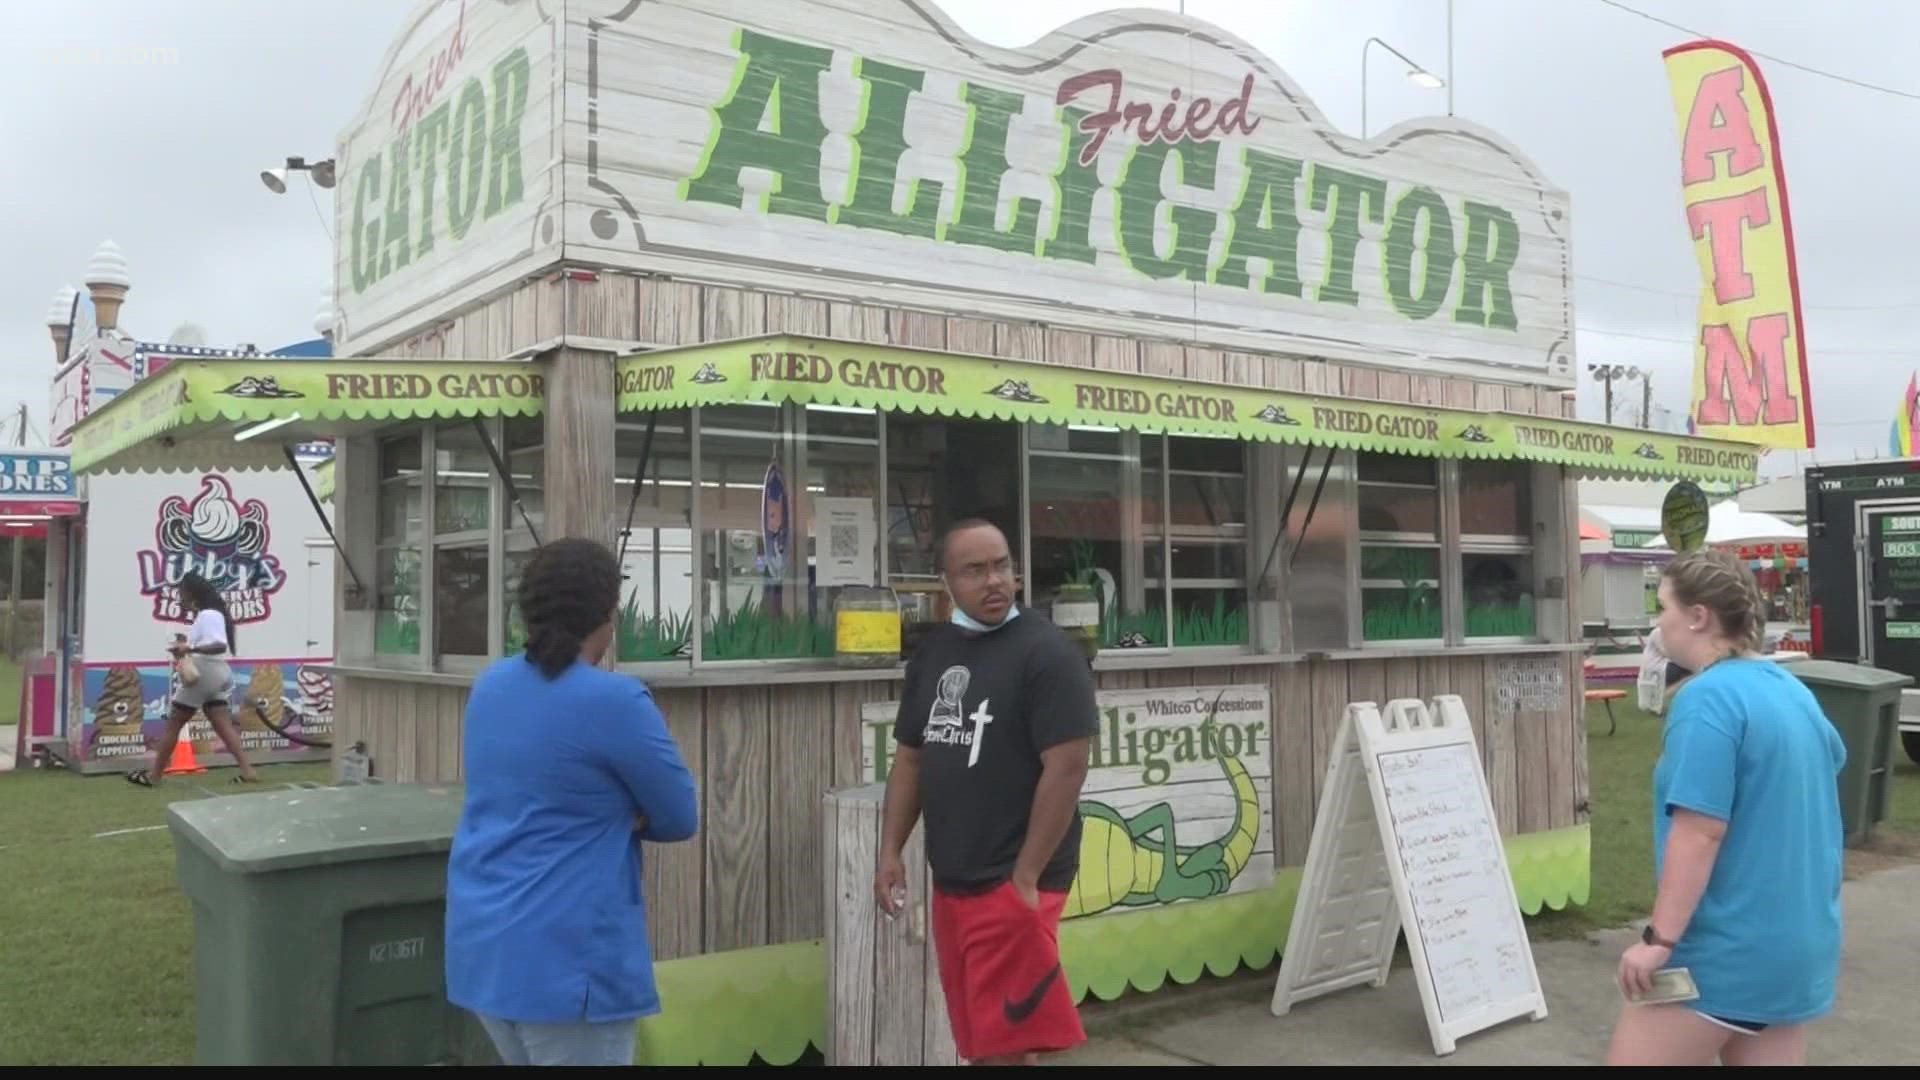 The Orangeburg County Fair, one of the oldest fairs in the state, is back this year.